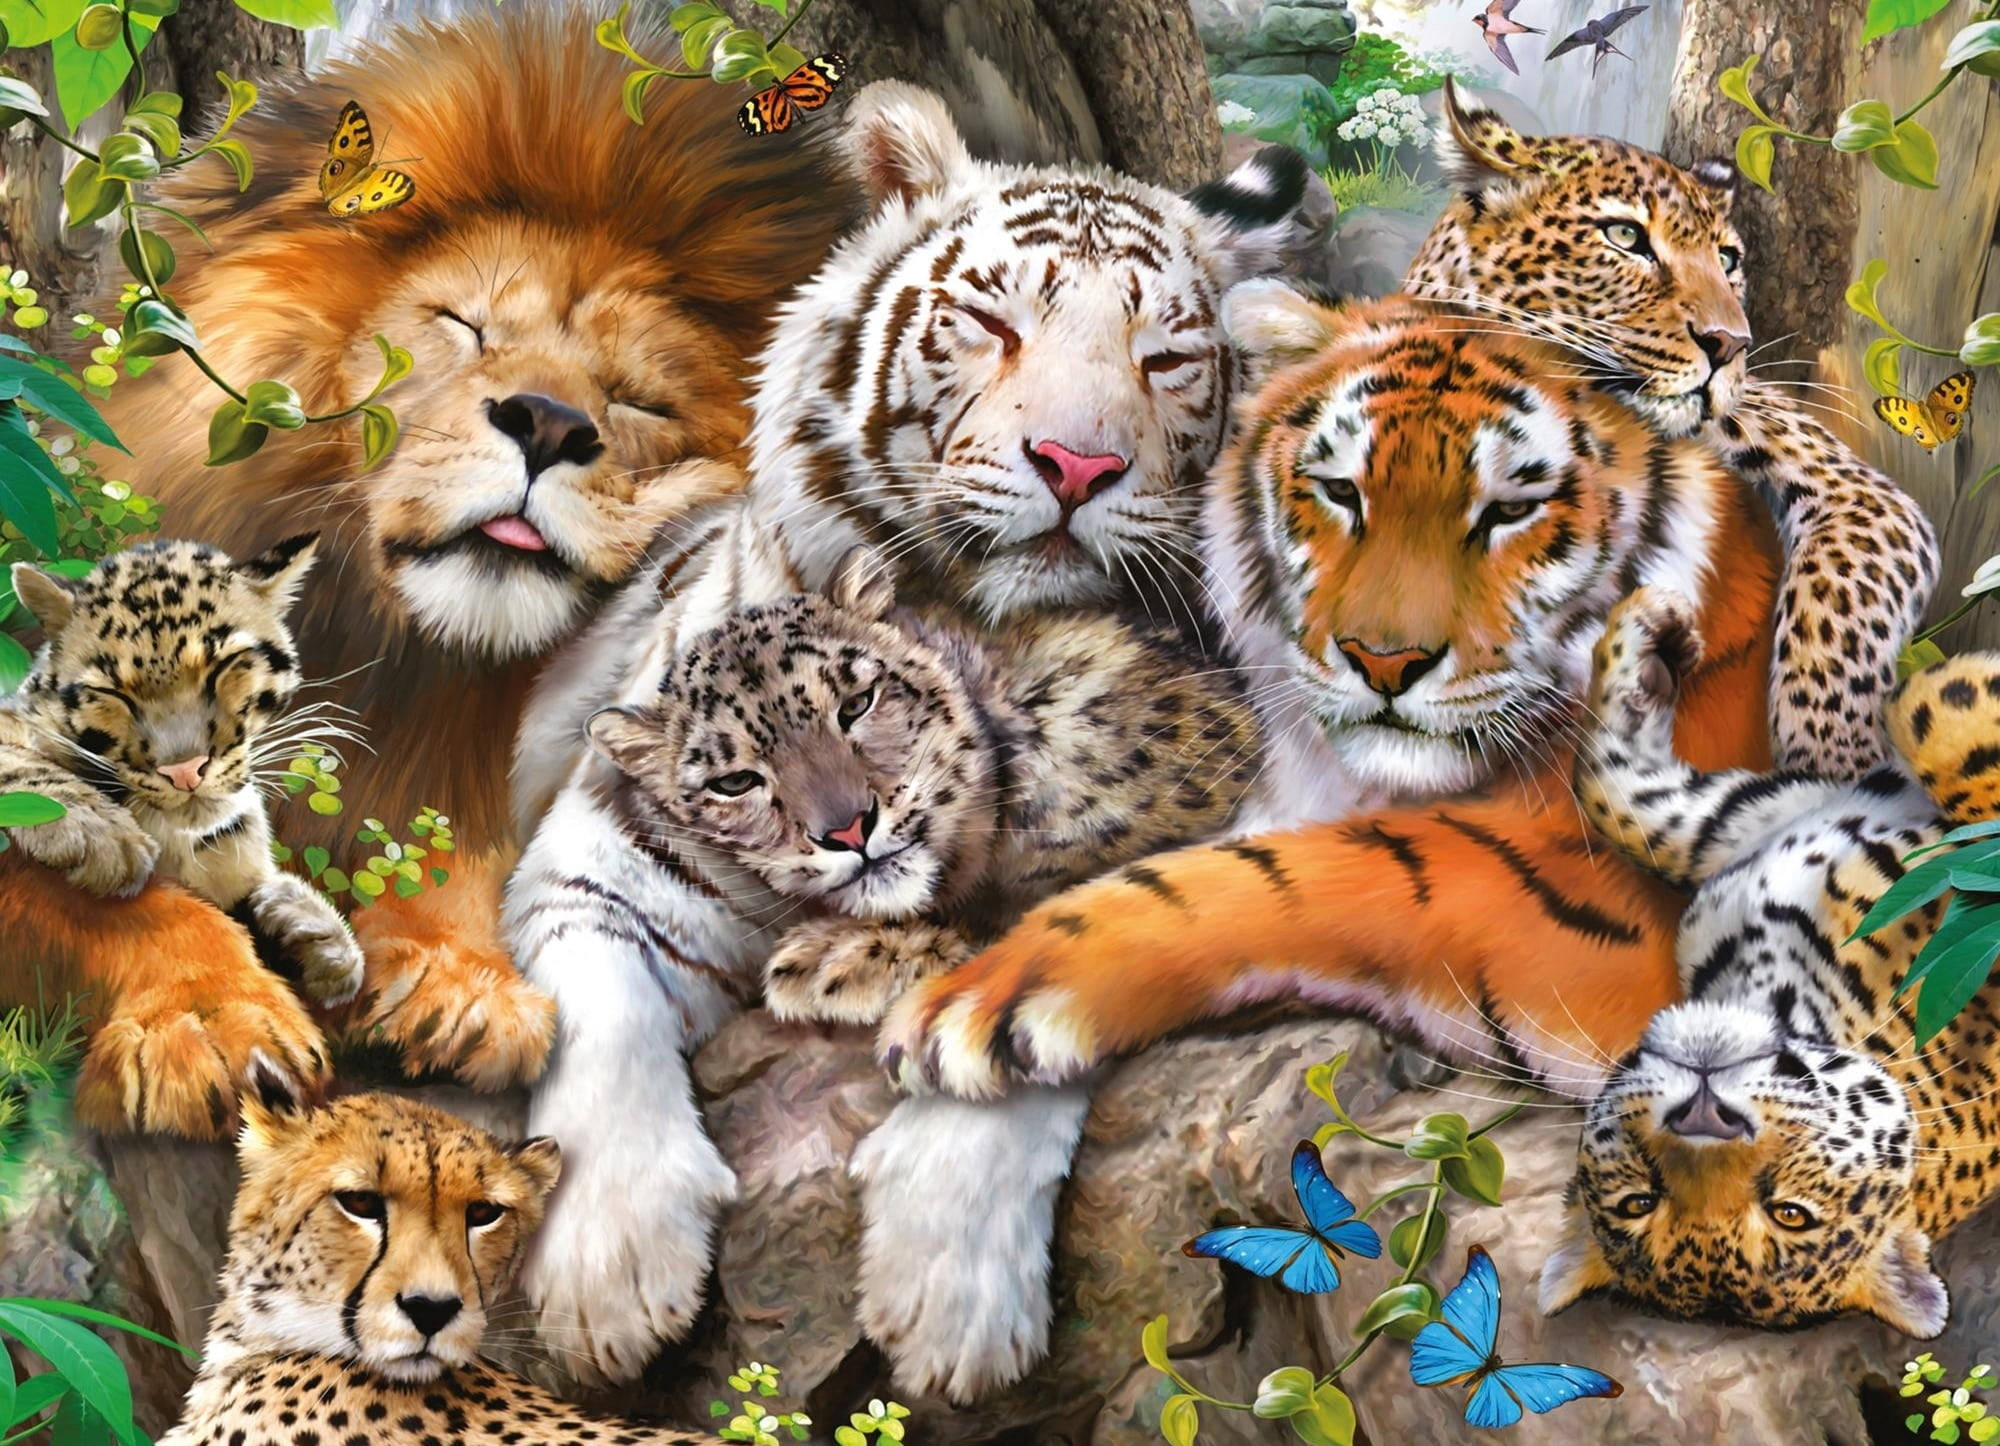 Cuddling Lion And Tiger Group Wallpaper